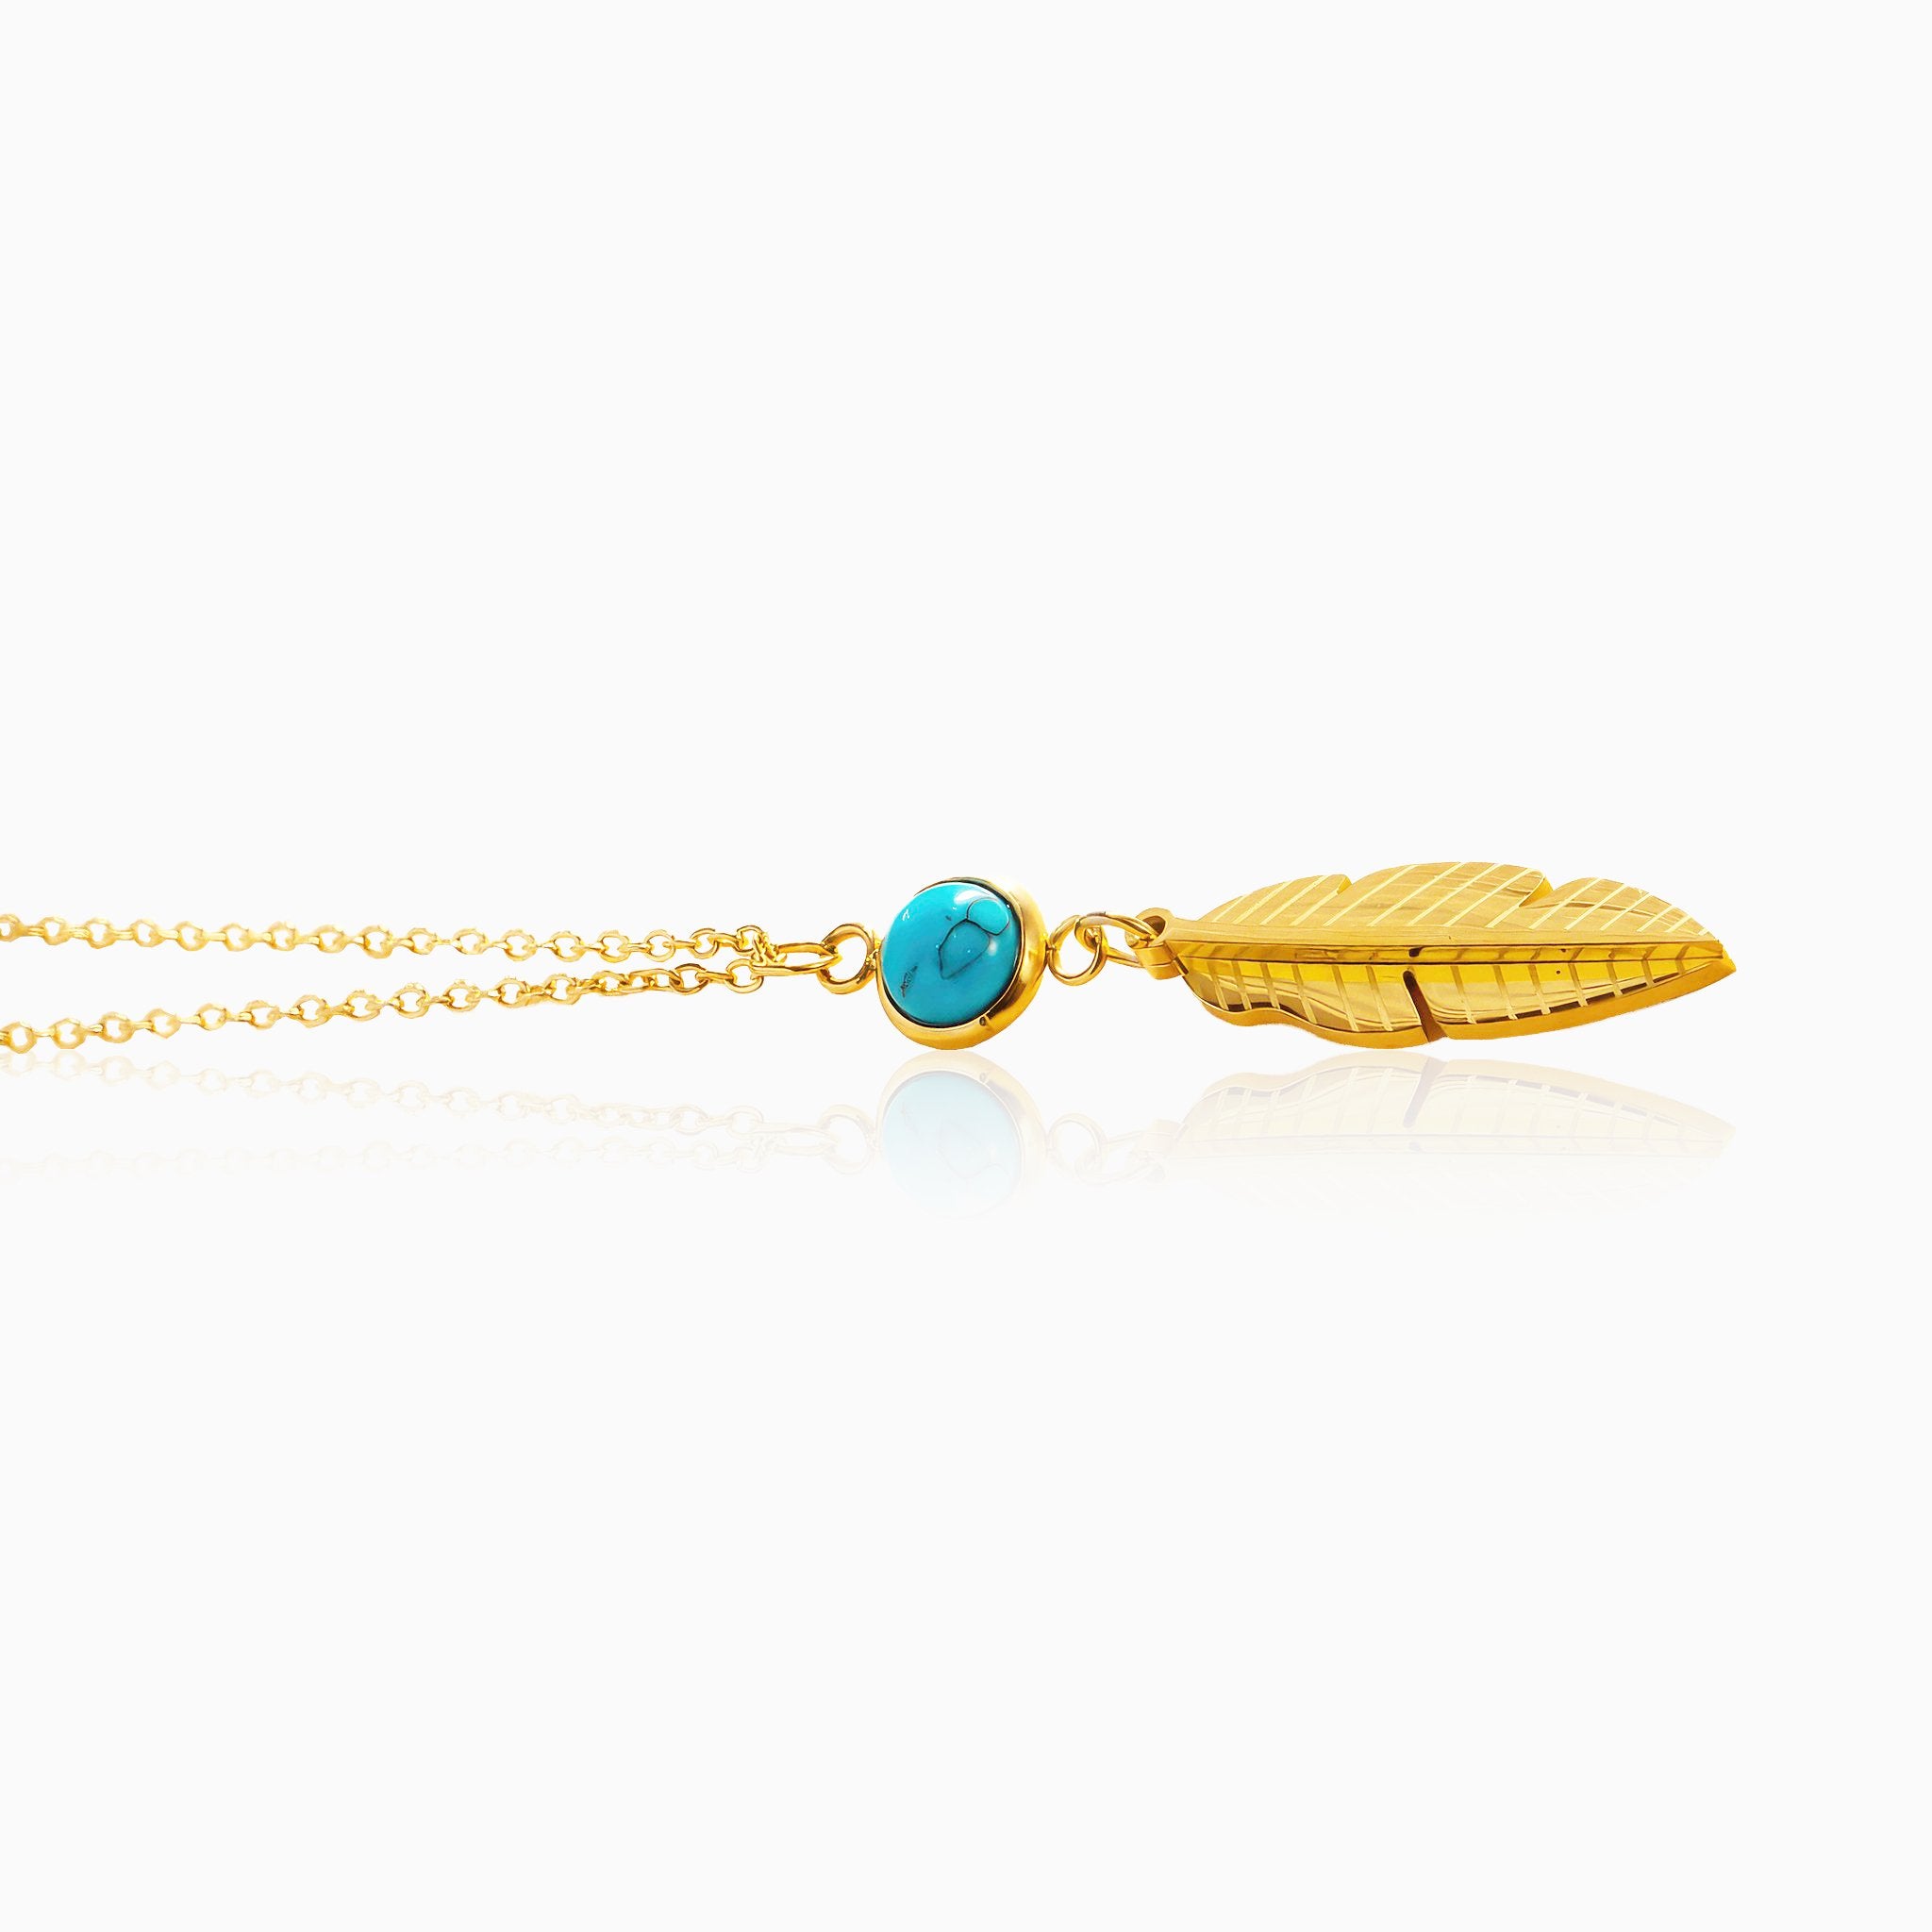 Feather Necklace with Inlaid Turquoise Pendant - Nobbier - Necklace - 18K Gold And Titanium PVD Coated Jewelry